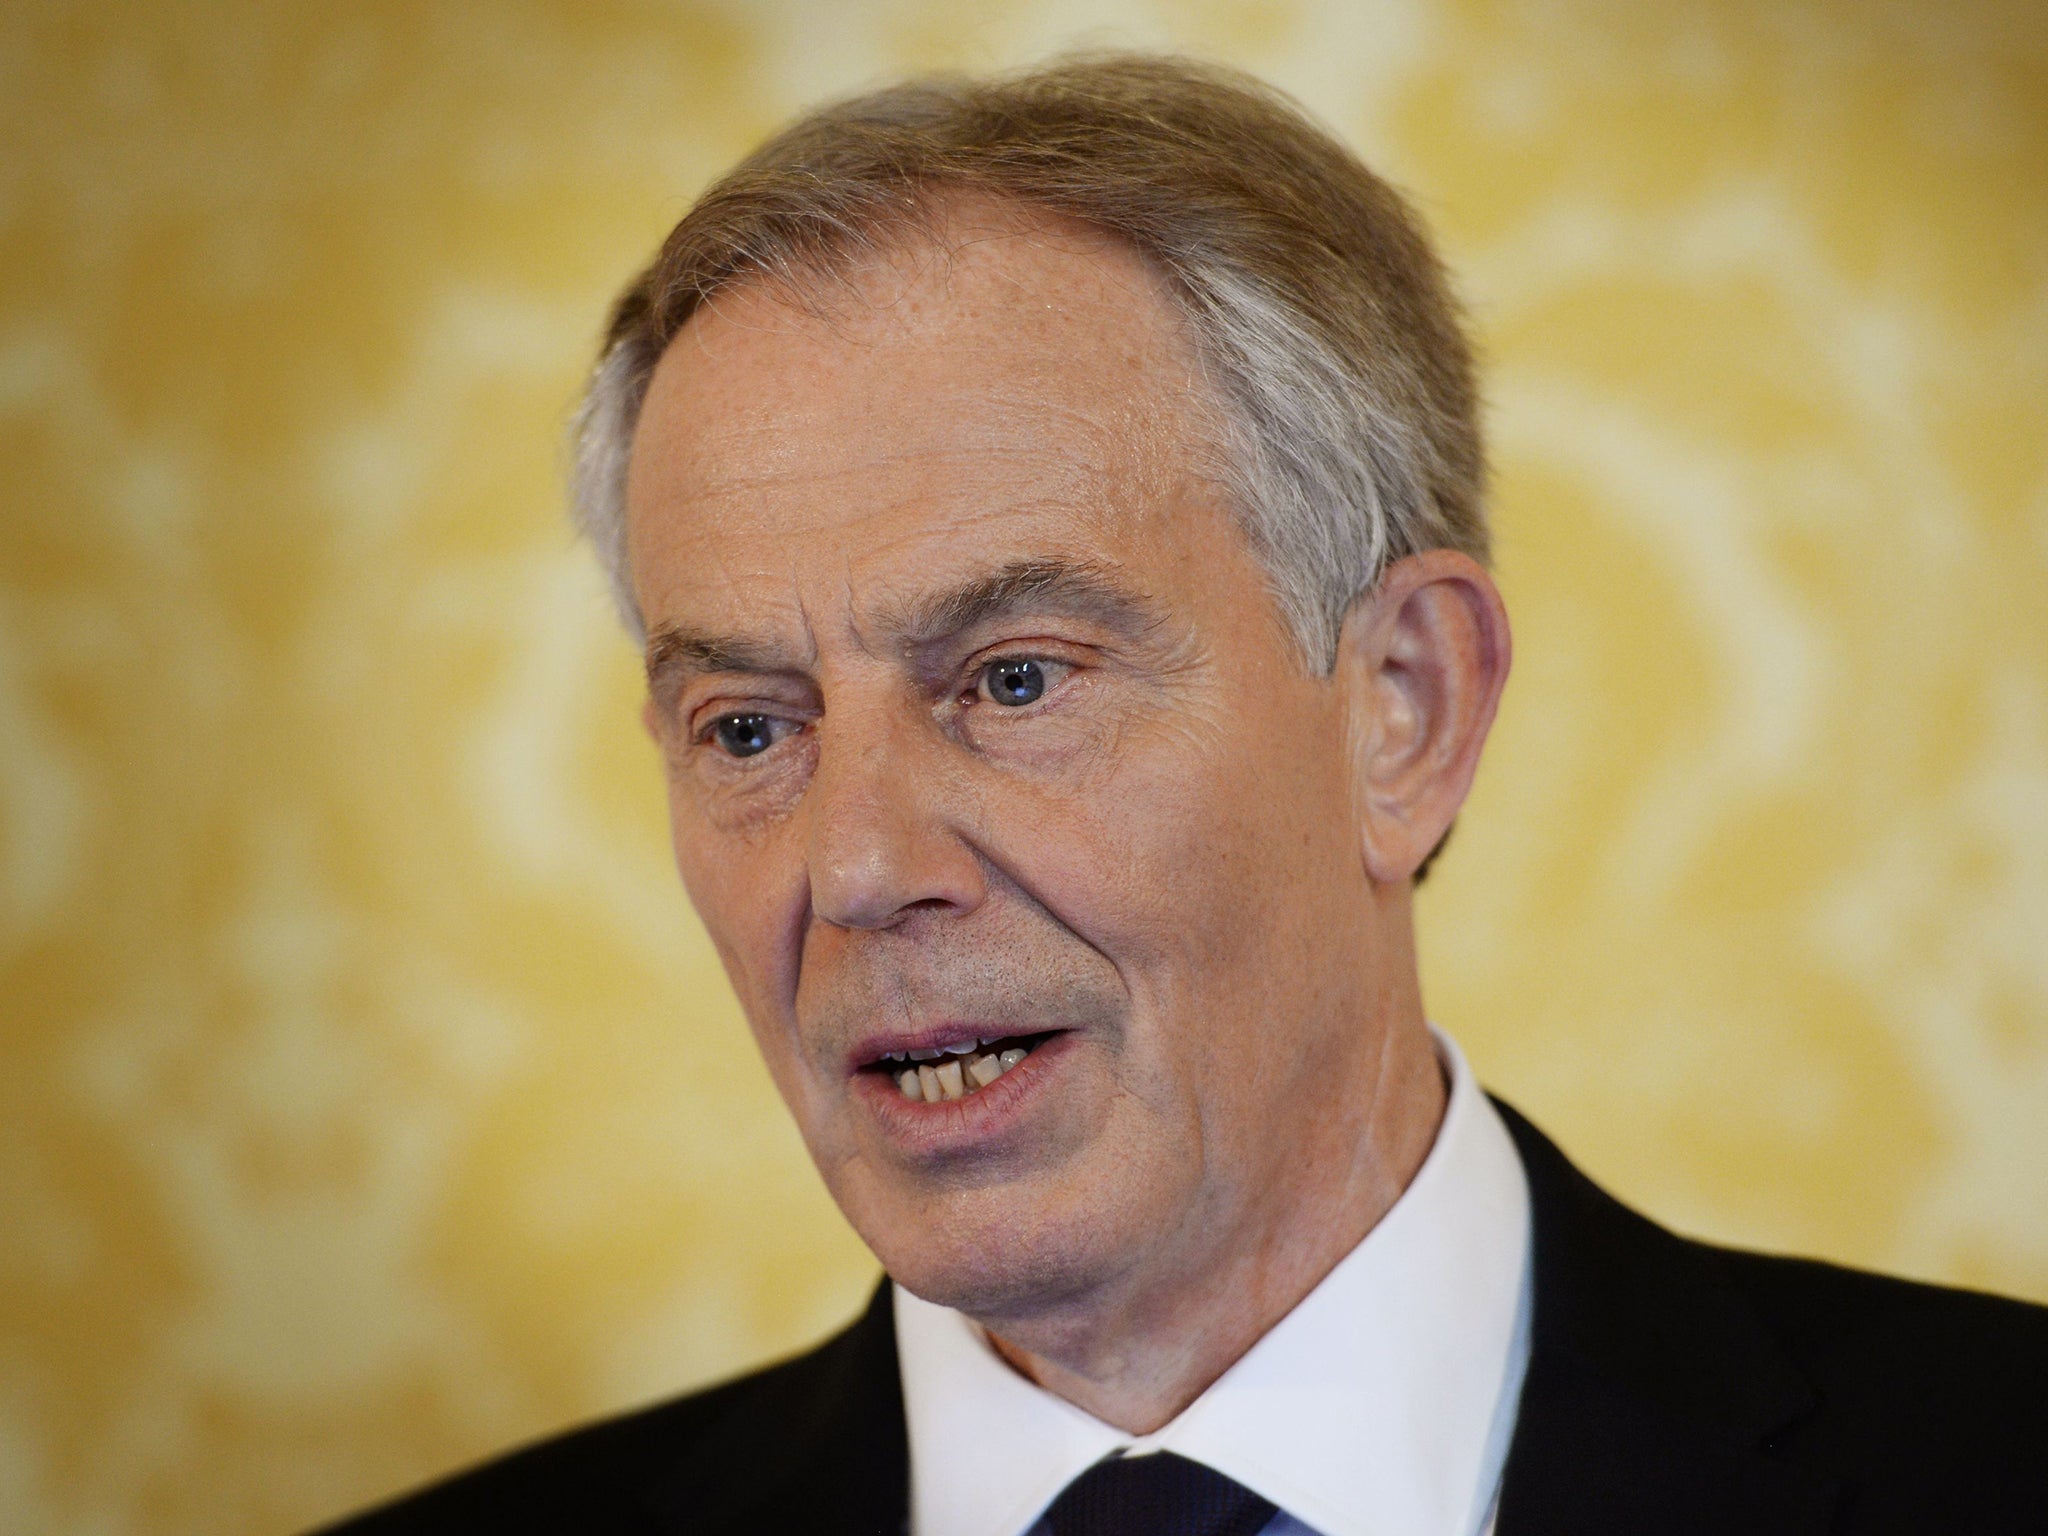 Tony Blair has conducted his first one-on-one interview since the findings of the Chilcot inquiry were revealed